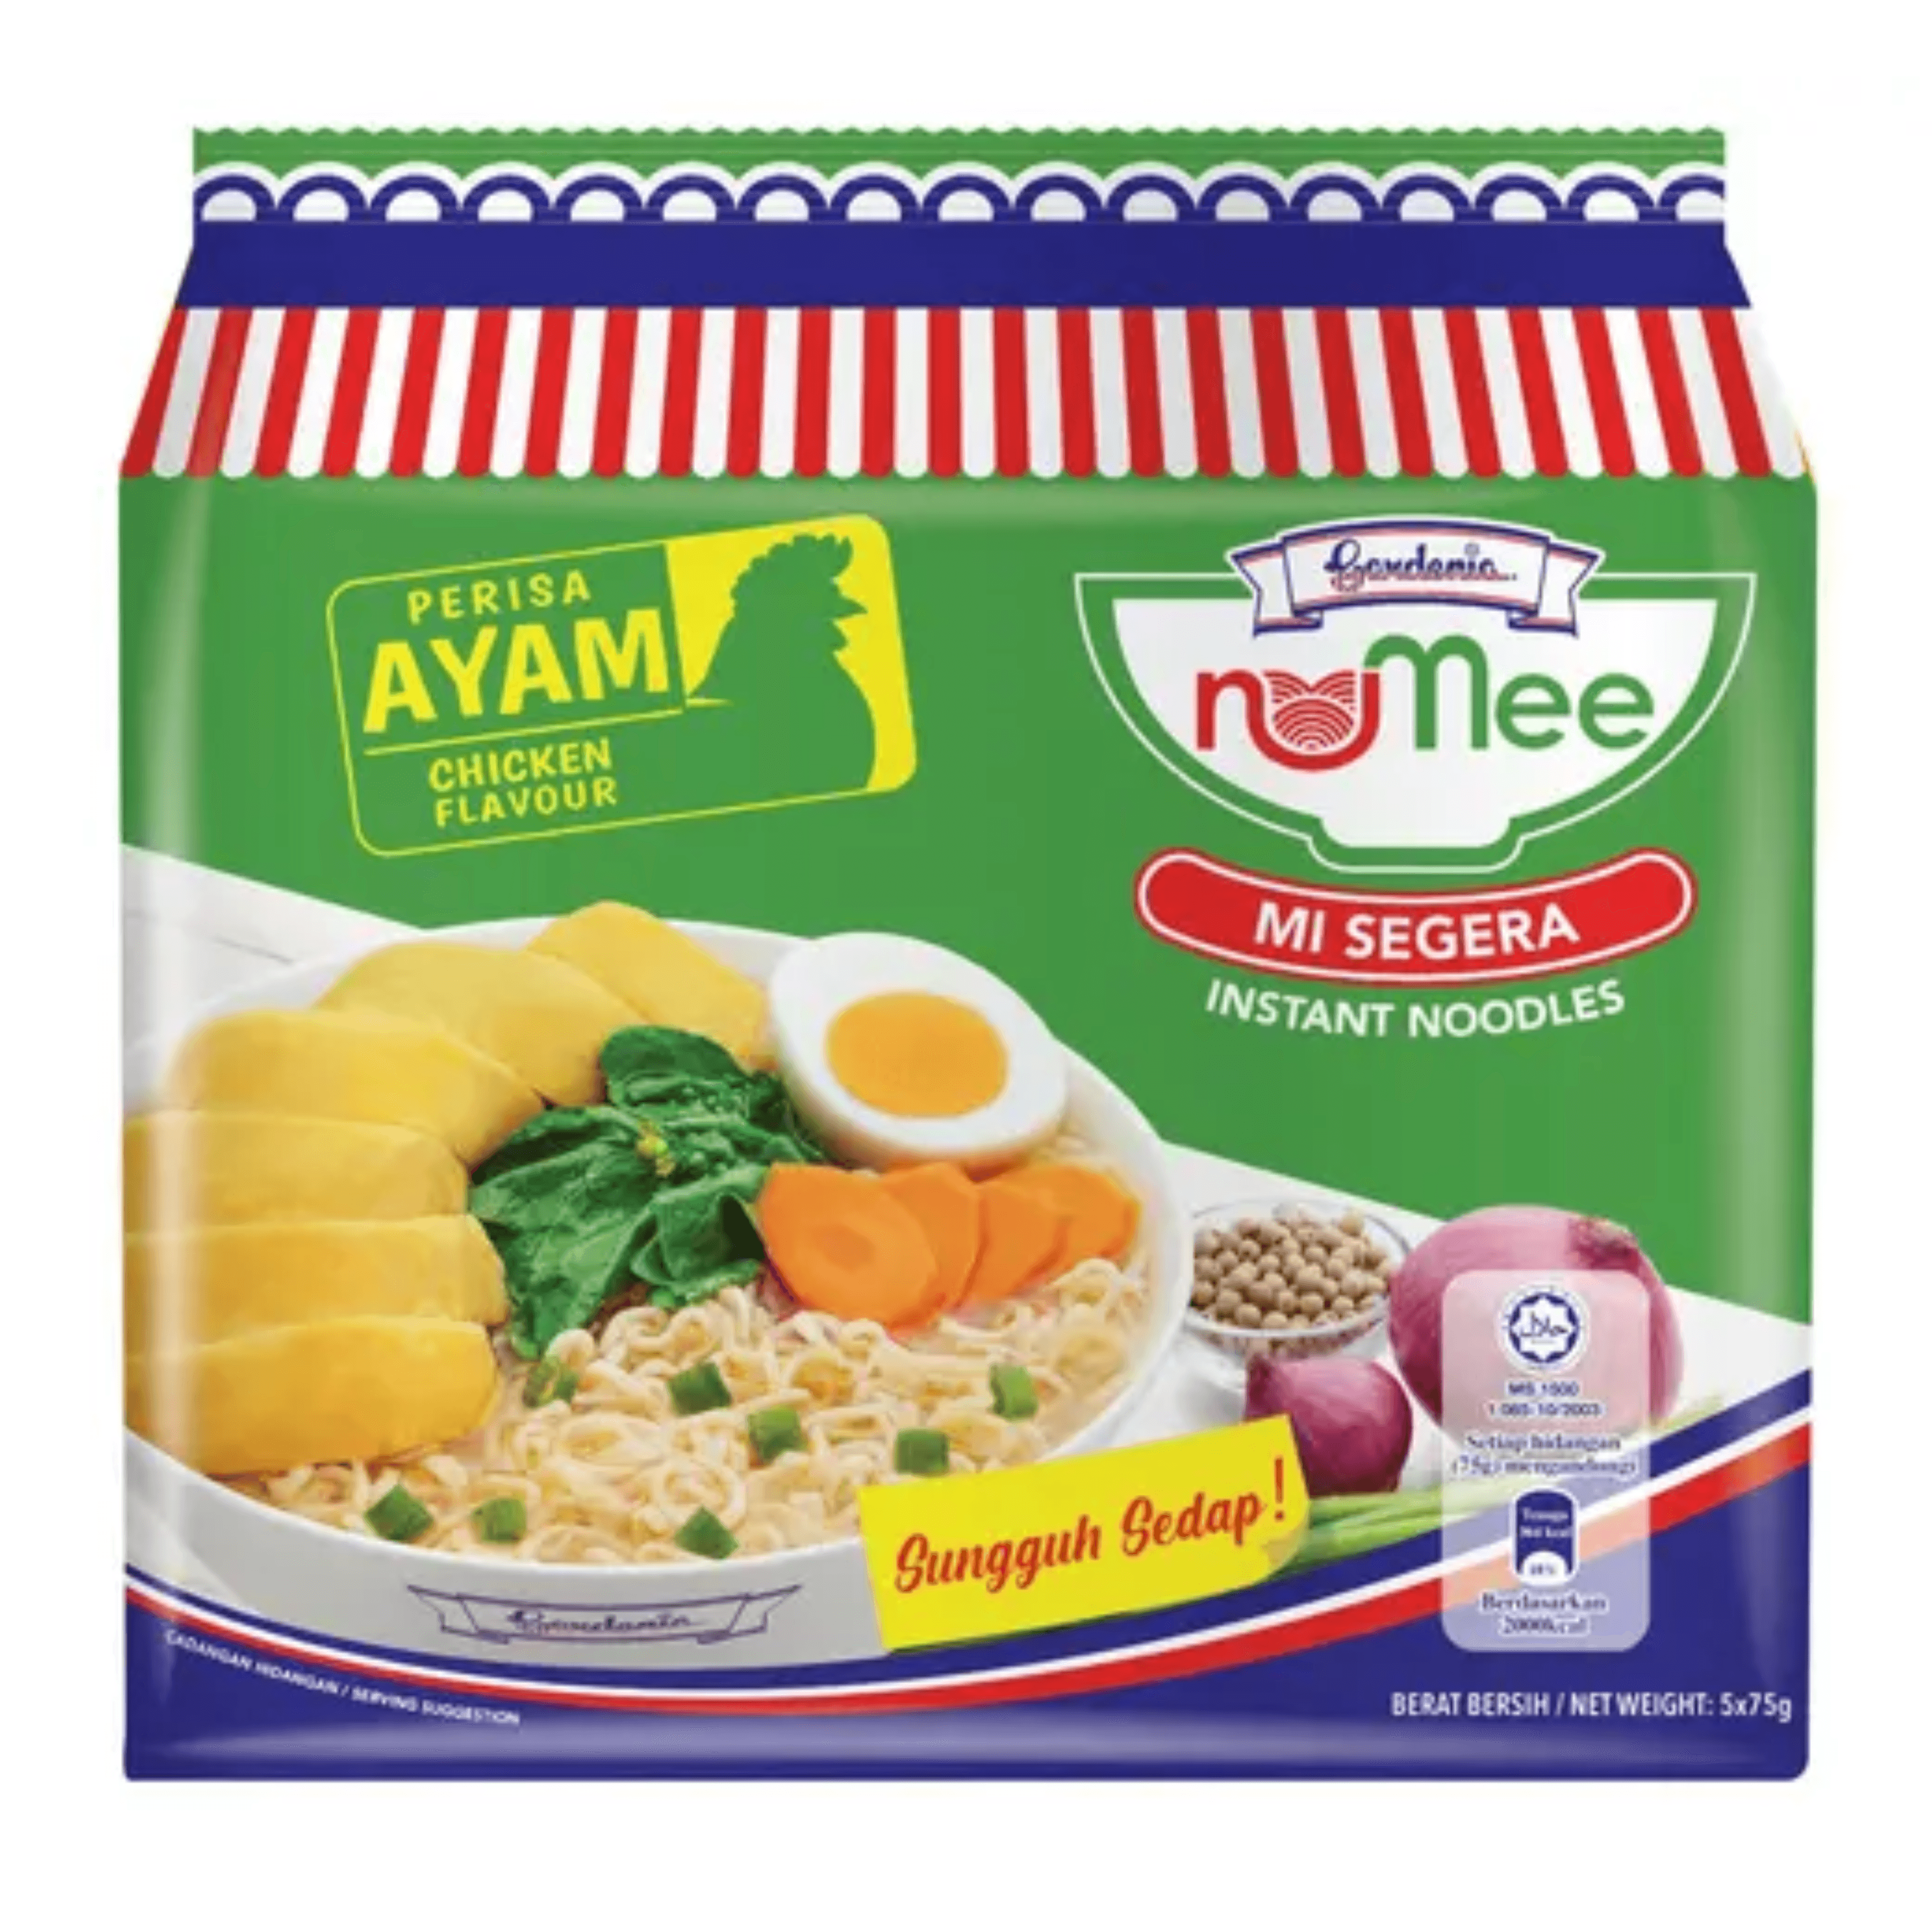 Numee Instant Noodle Chicken Flavour * 75g x 5